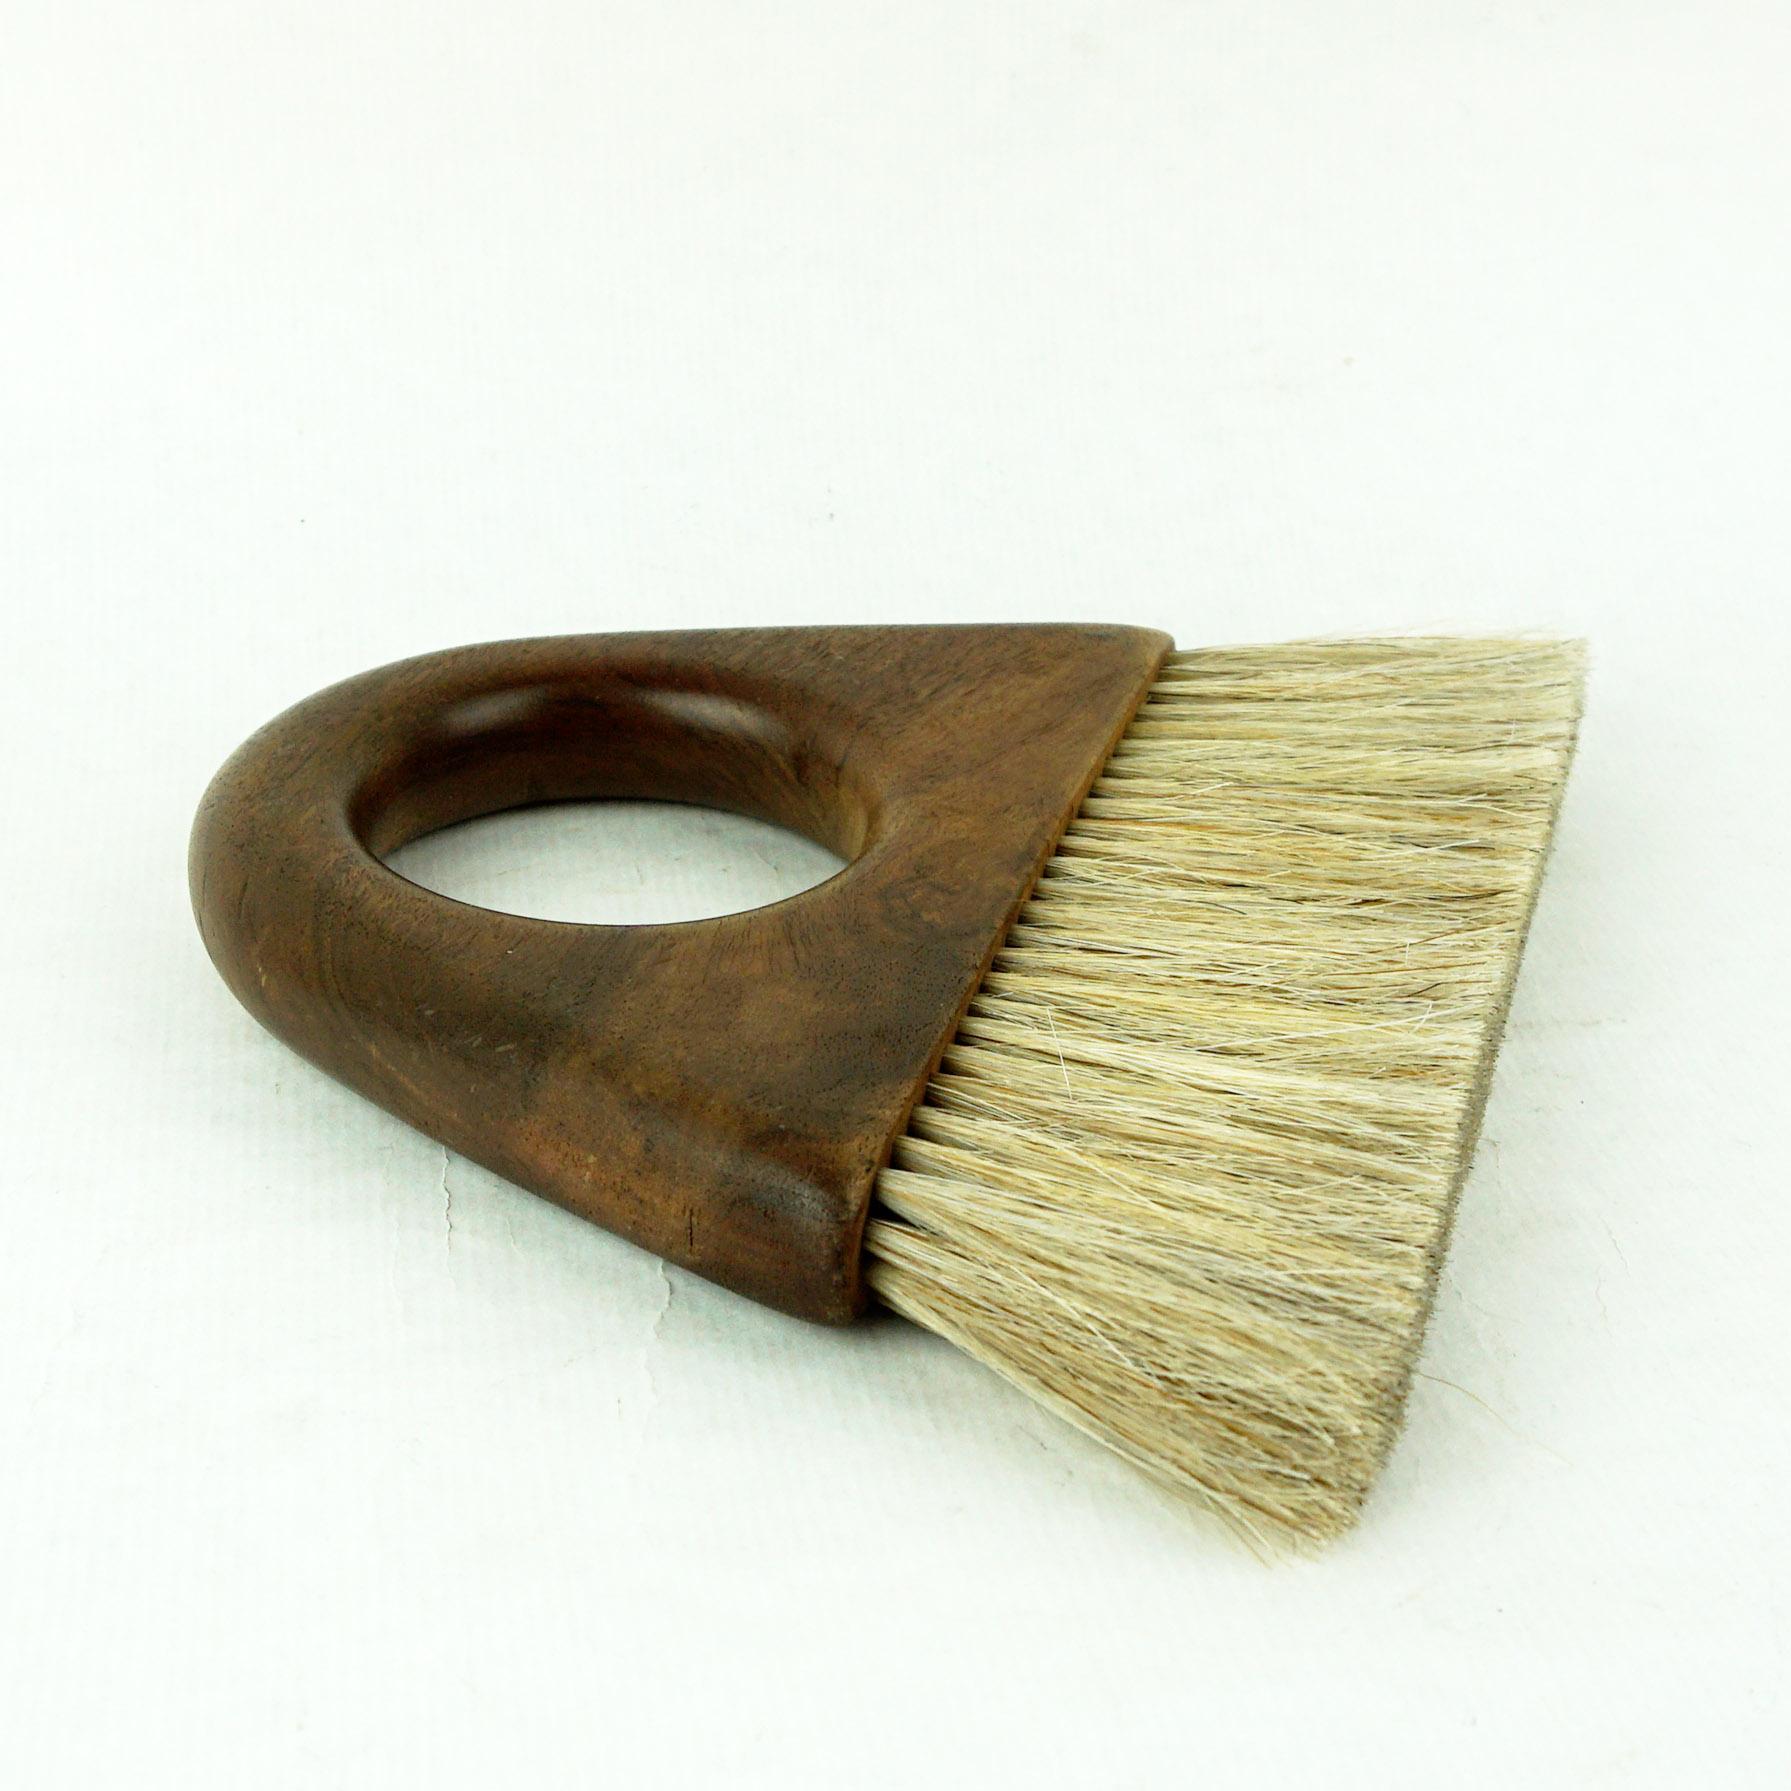 Amazing modernist wall-hung clothes brush from the 1950s. Designed and executed by Carl Auböck, Vienna, in the 1950s. Made of walnut and natural bristles. In very good condition with nice patina.